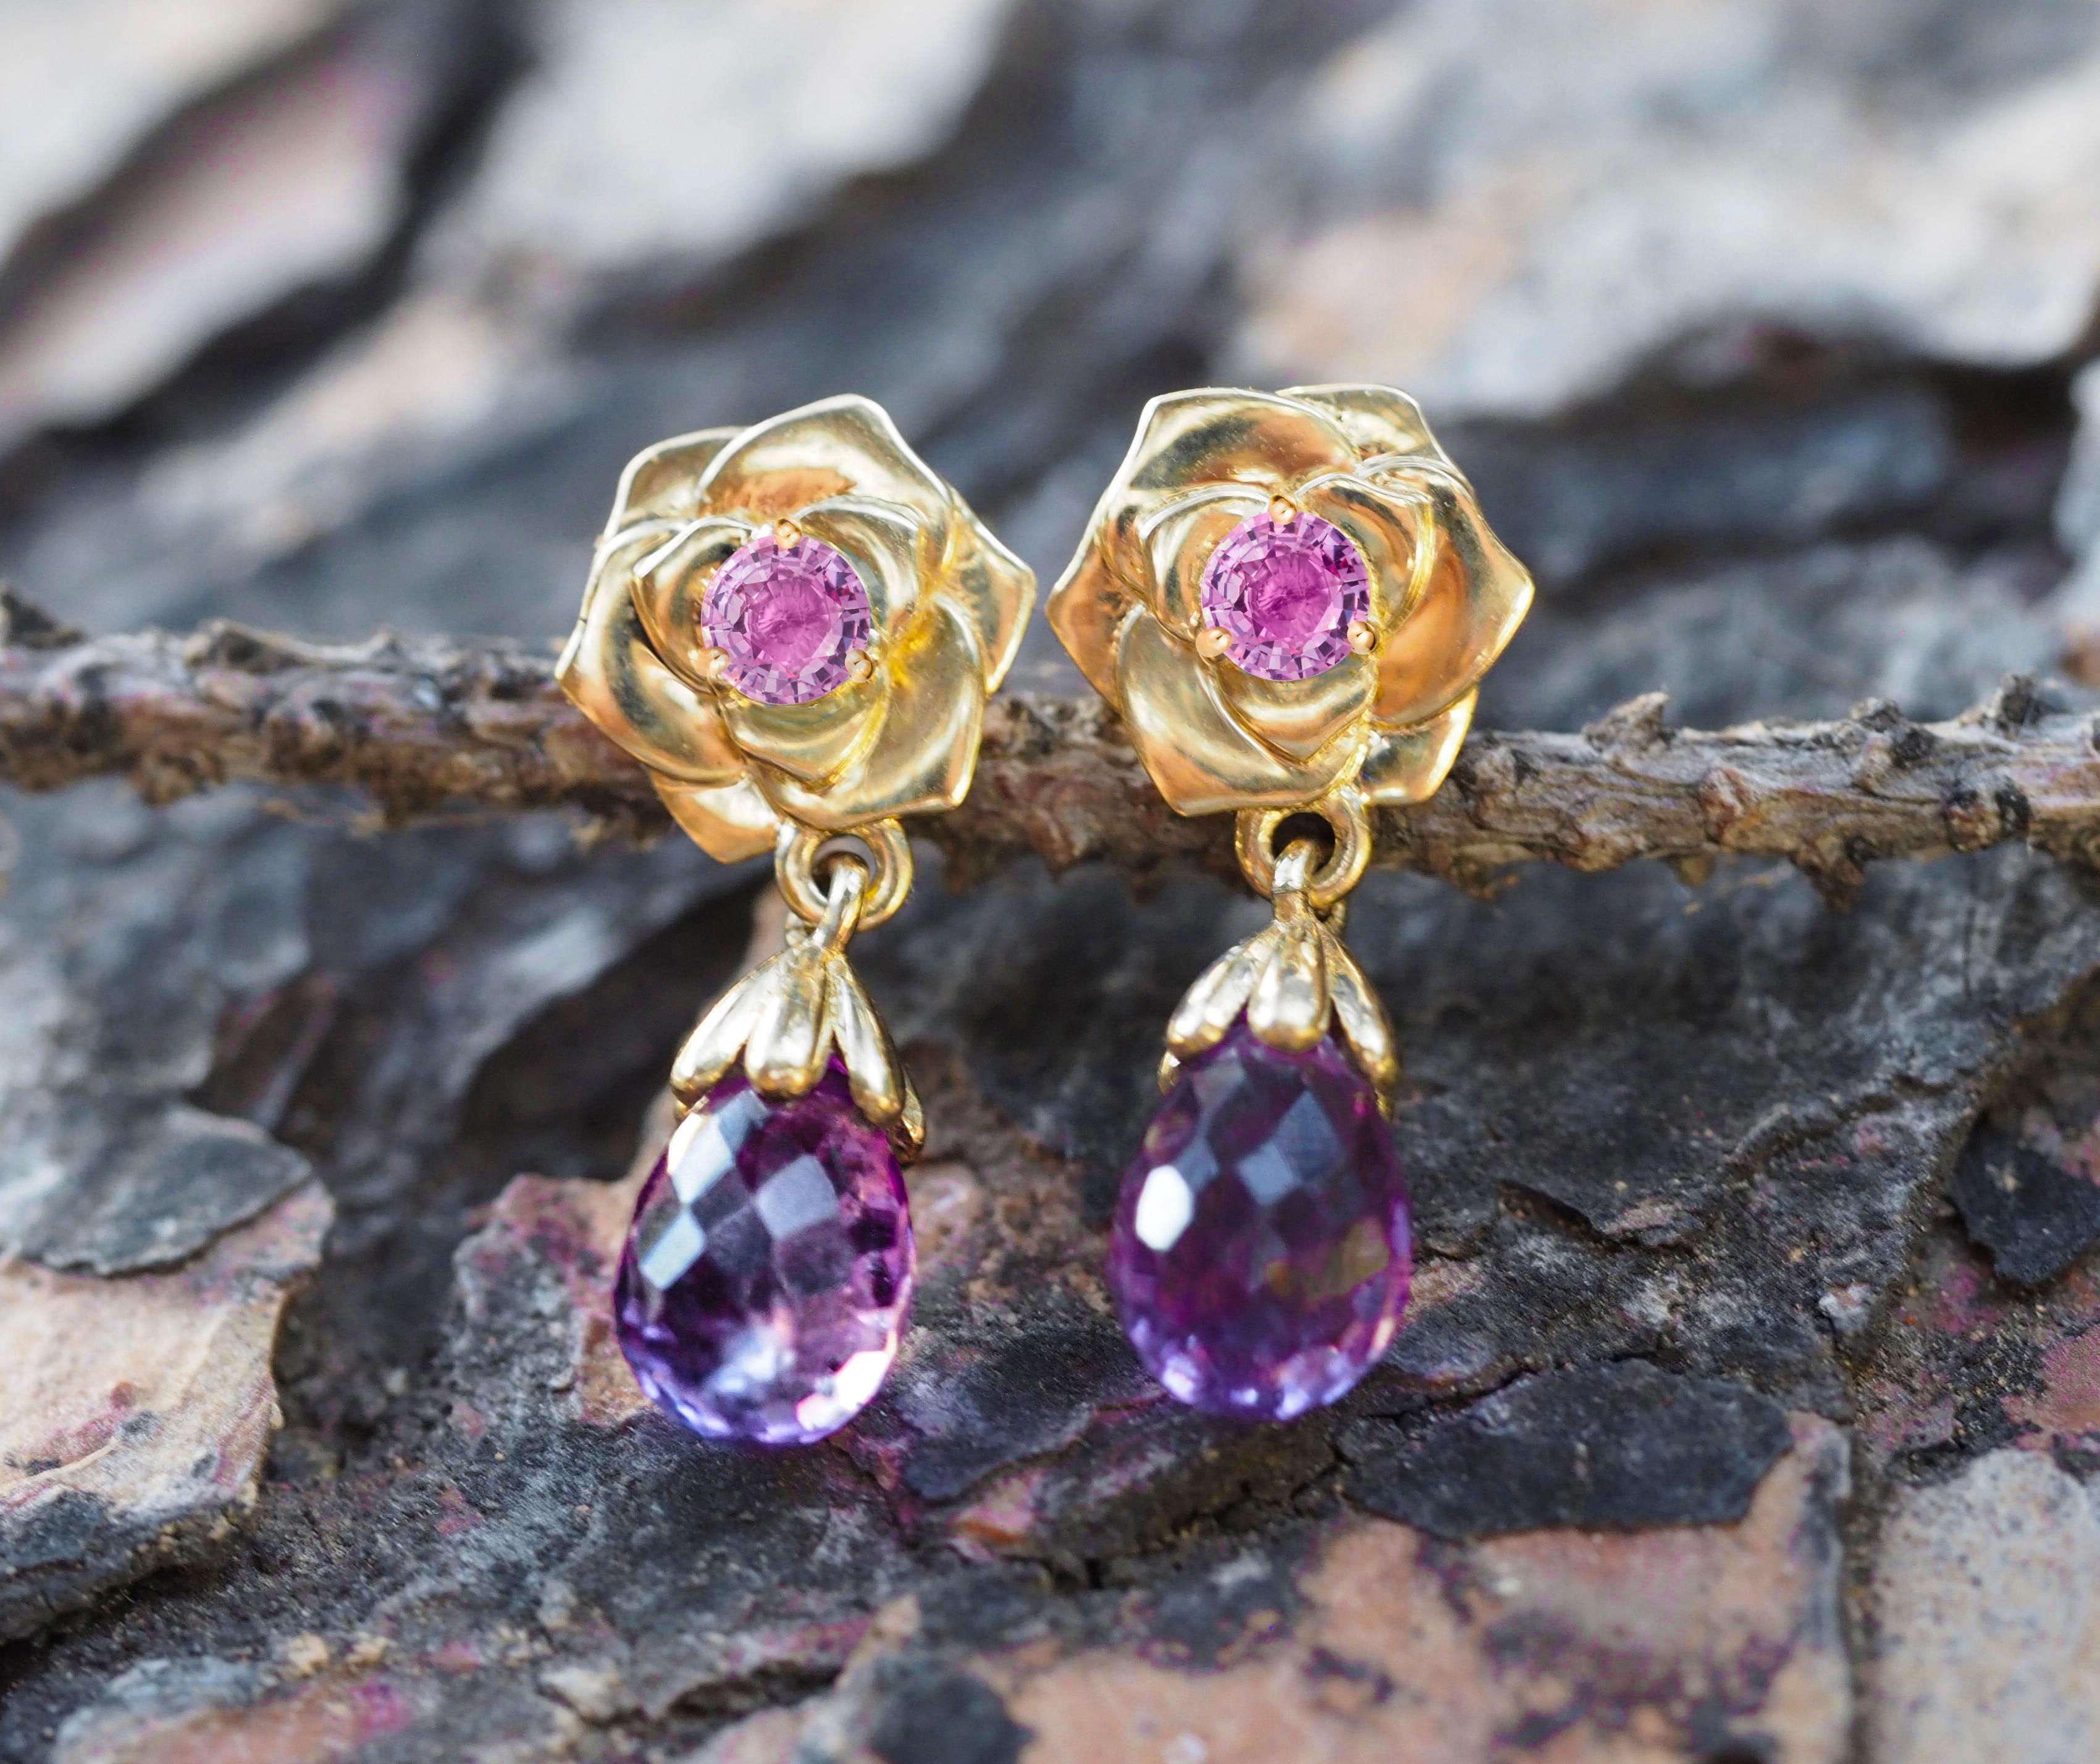 Rose flower 14k gold earrings studs. 
Pink sapphire, amethyst earrings. Briolette amethyst earrings. Drop amethyst earrings.

Weight: 2.65 g
Gold - 14 kt gold marked
Size: 18.5x8.1 mm.

Main stones: Amethysts - 2 pieces (2 x 1.2 ct)
Briolette shape,